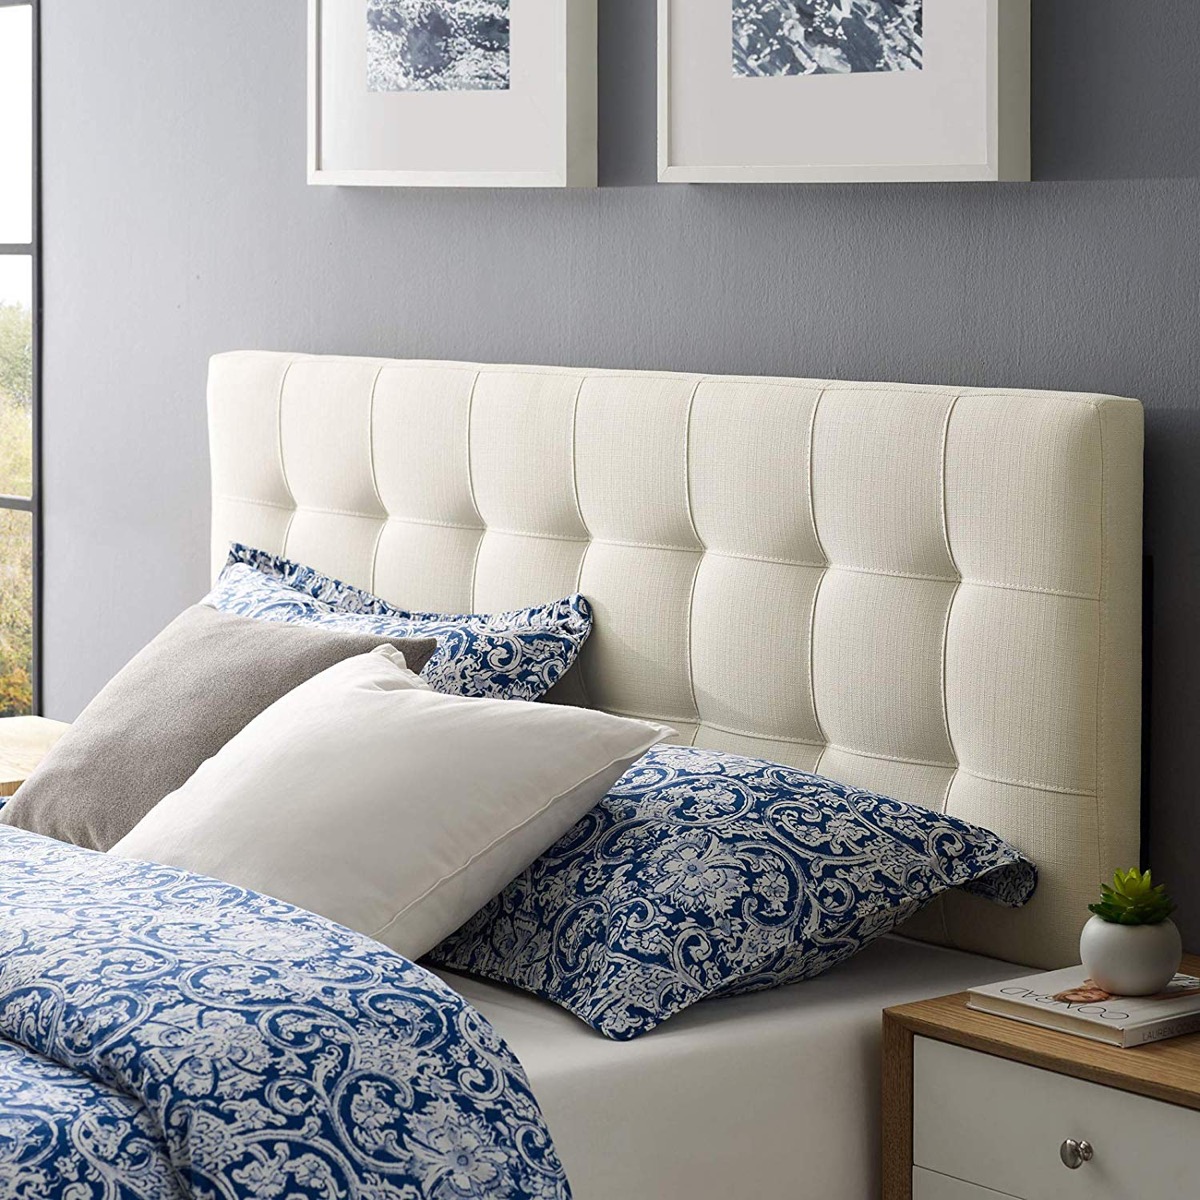 Ivory Colored Tufted Headboard Off White Fabric Bedframe Under $100 ...